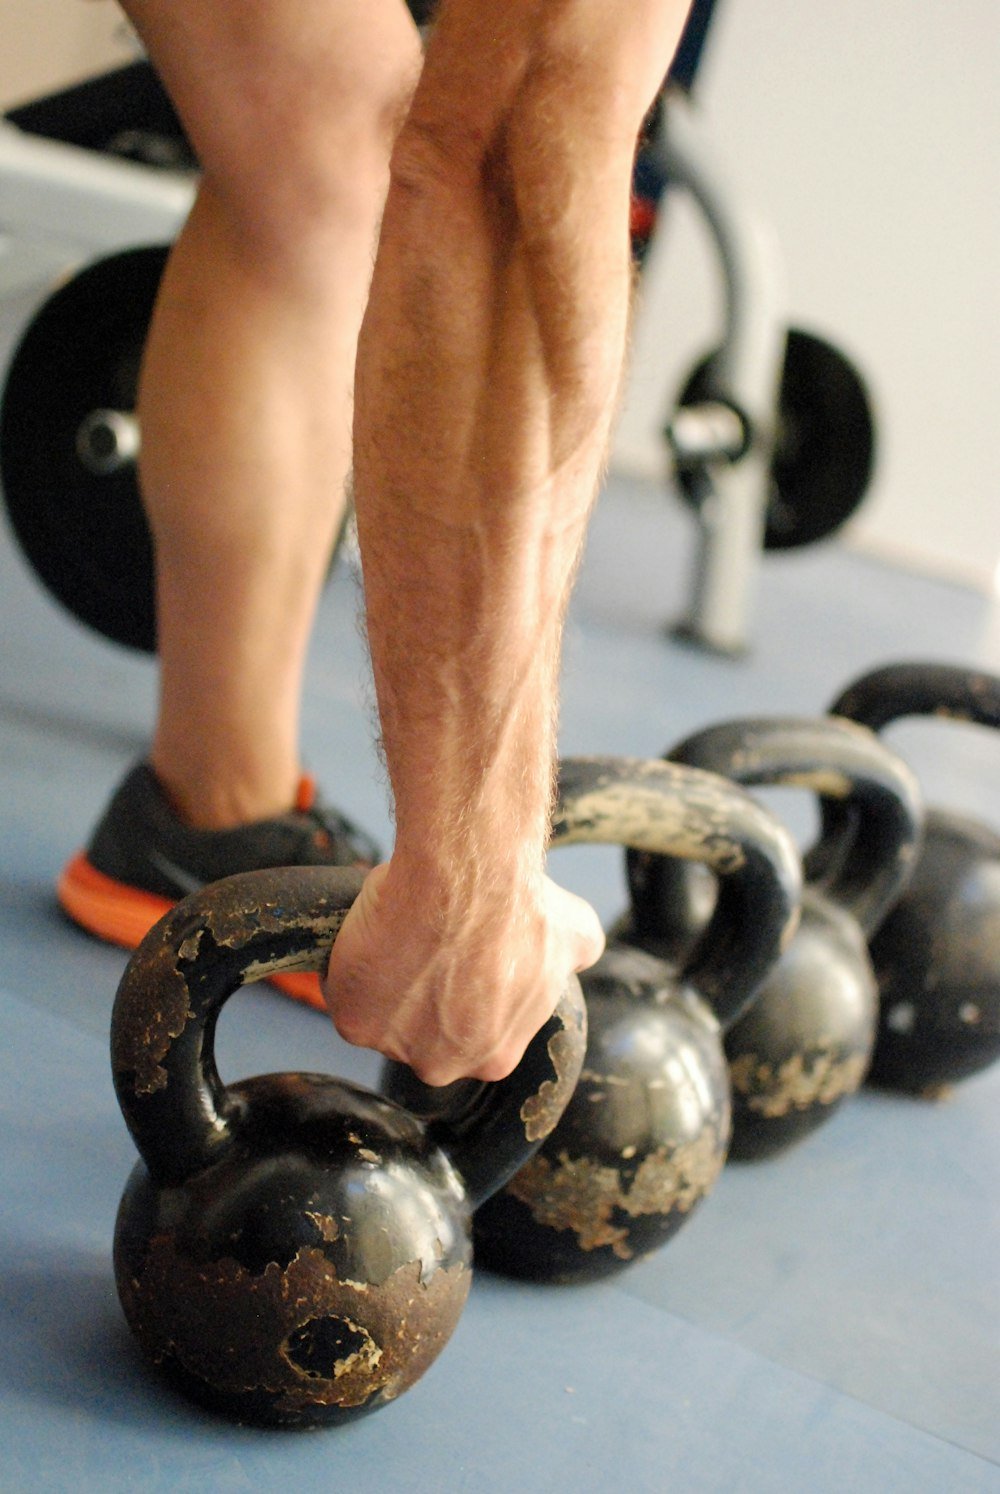 Man hand grip tight to a kettlebell